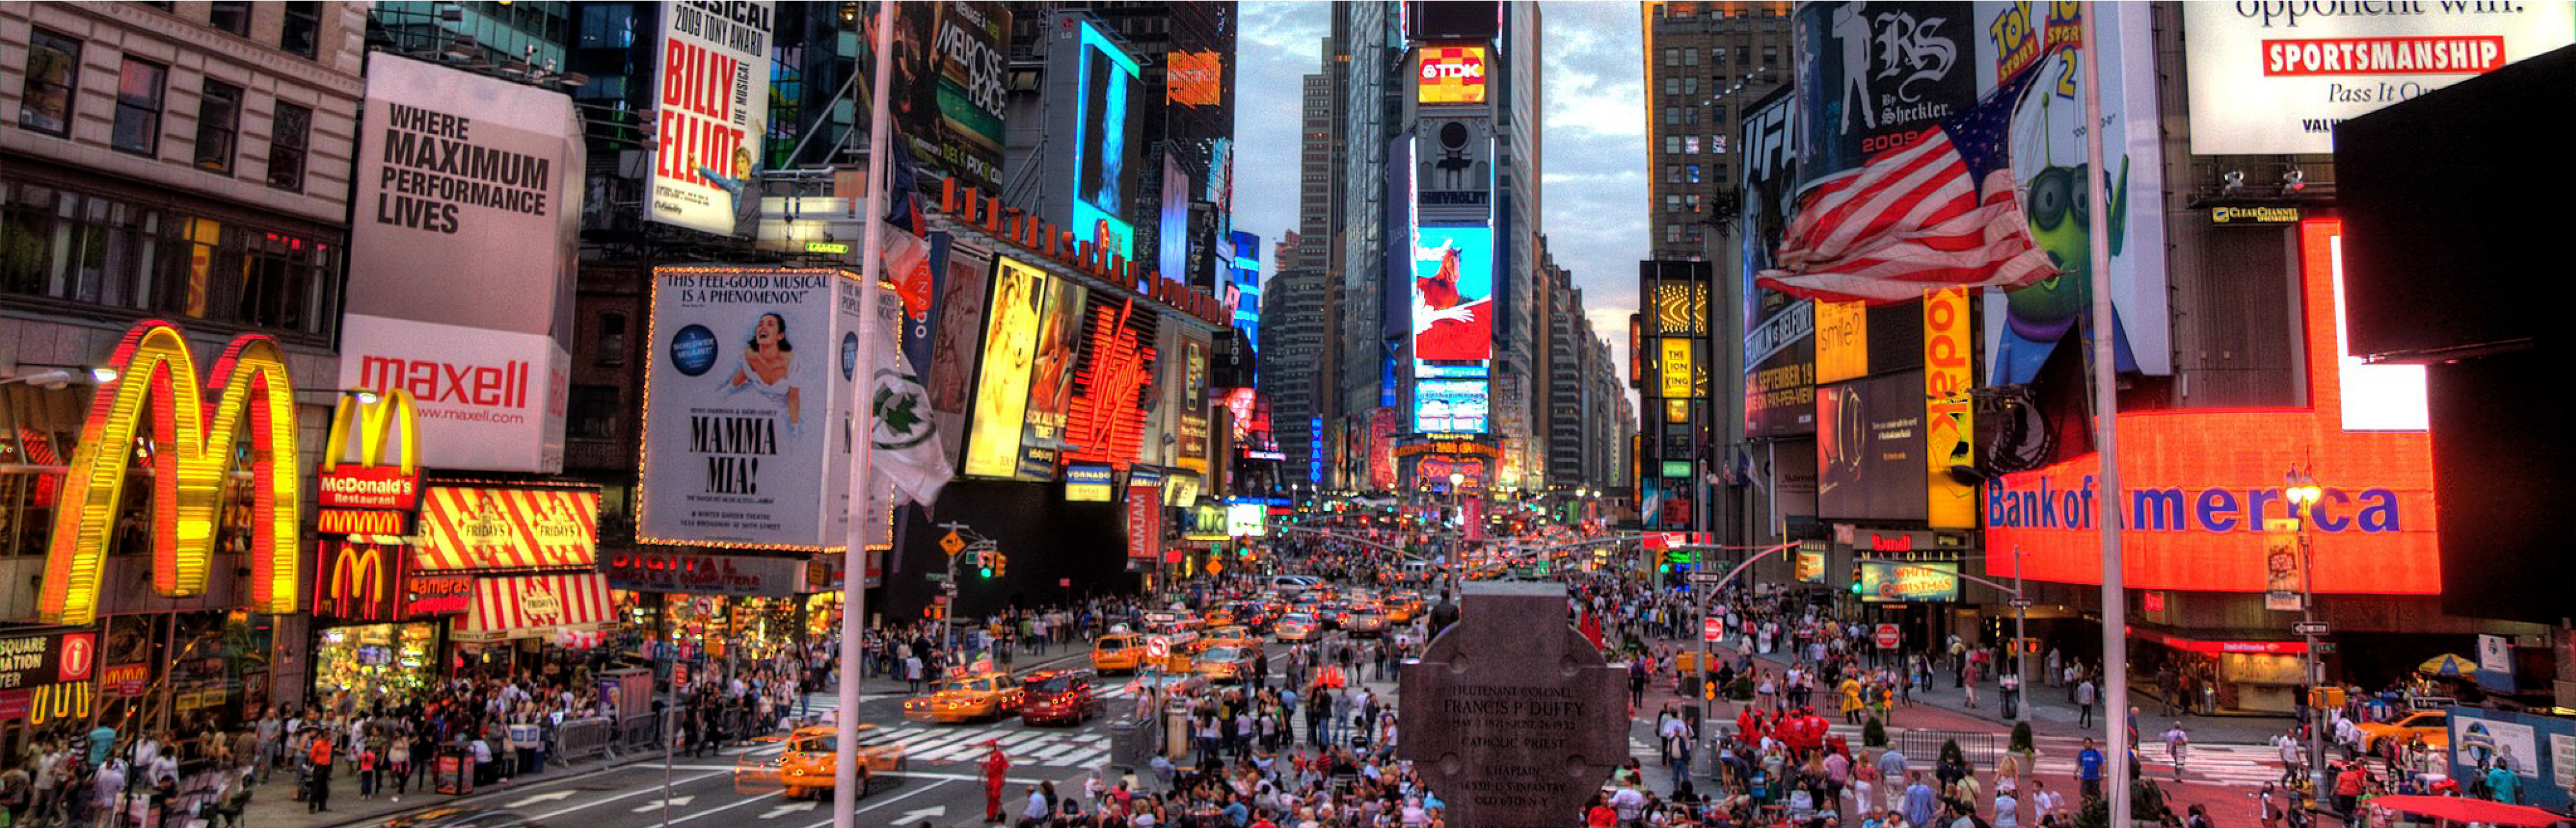 Travel has a trip planned for New York City, shown in the photo.